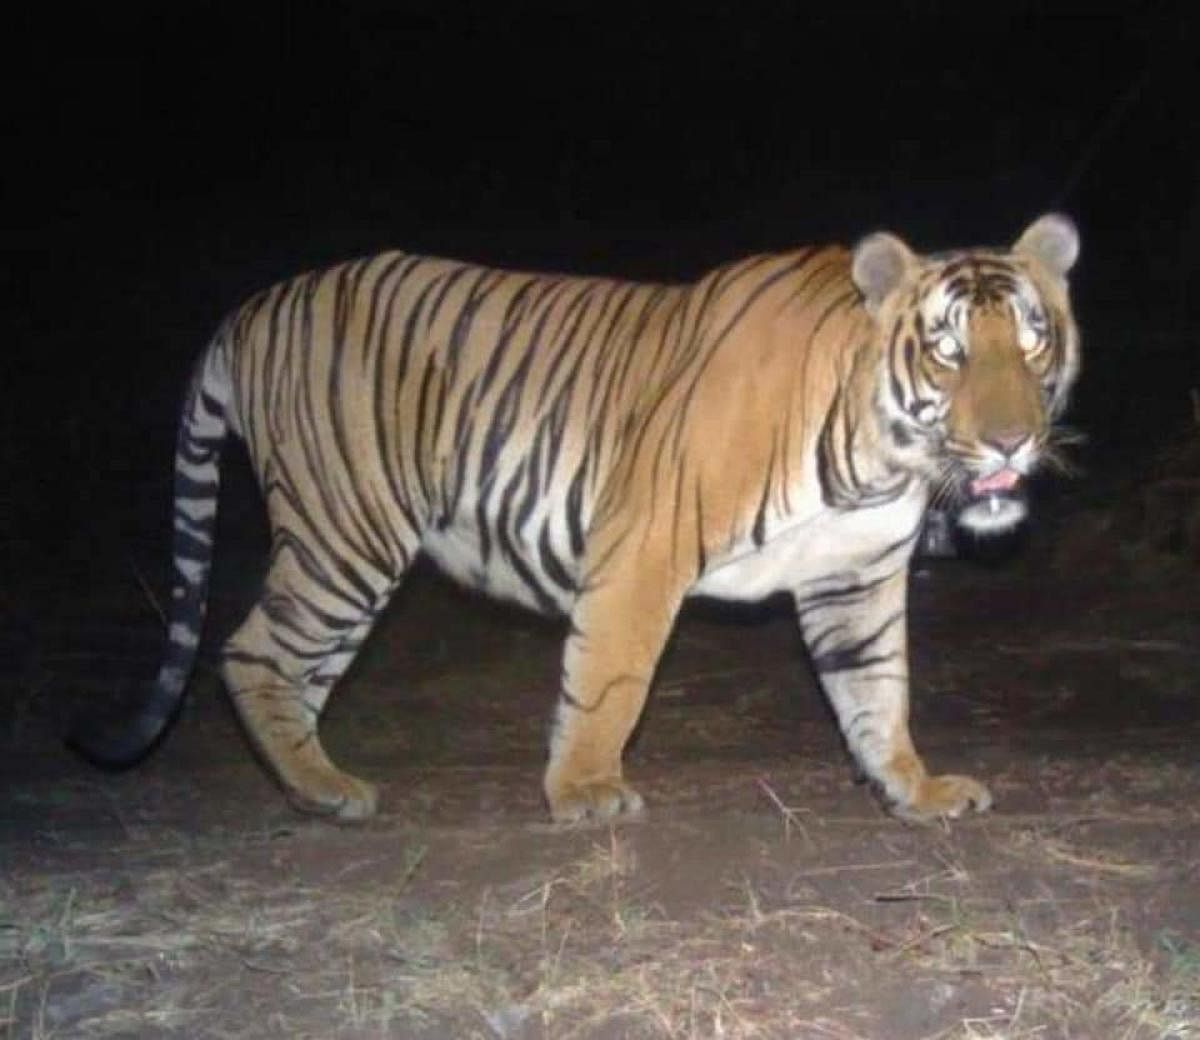 The image of the U-285 tiger caught on camera during the tiger operation.